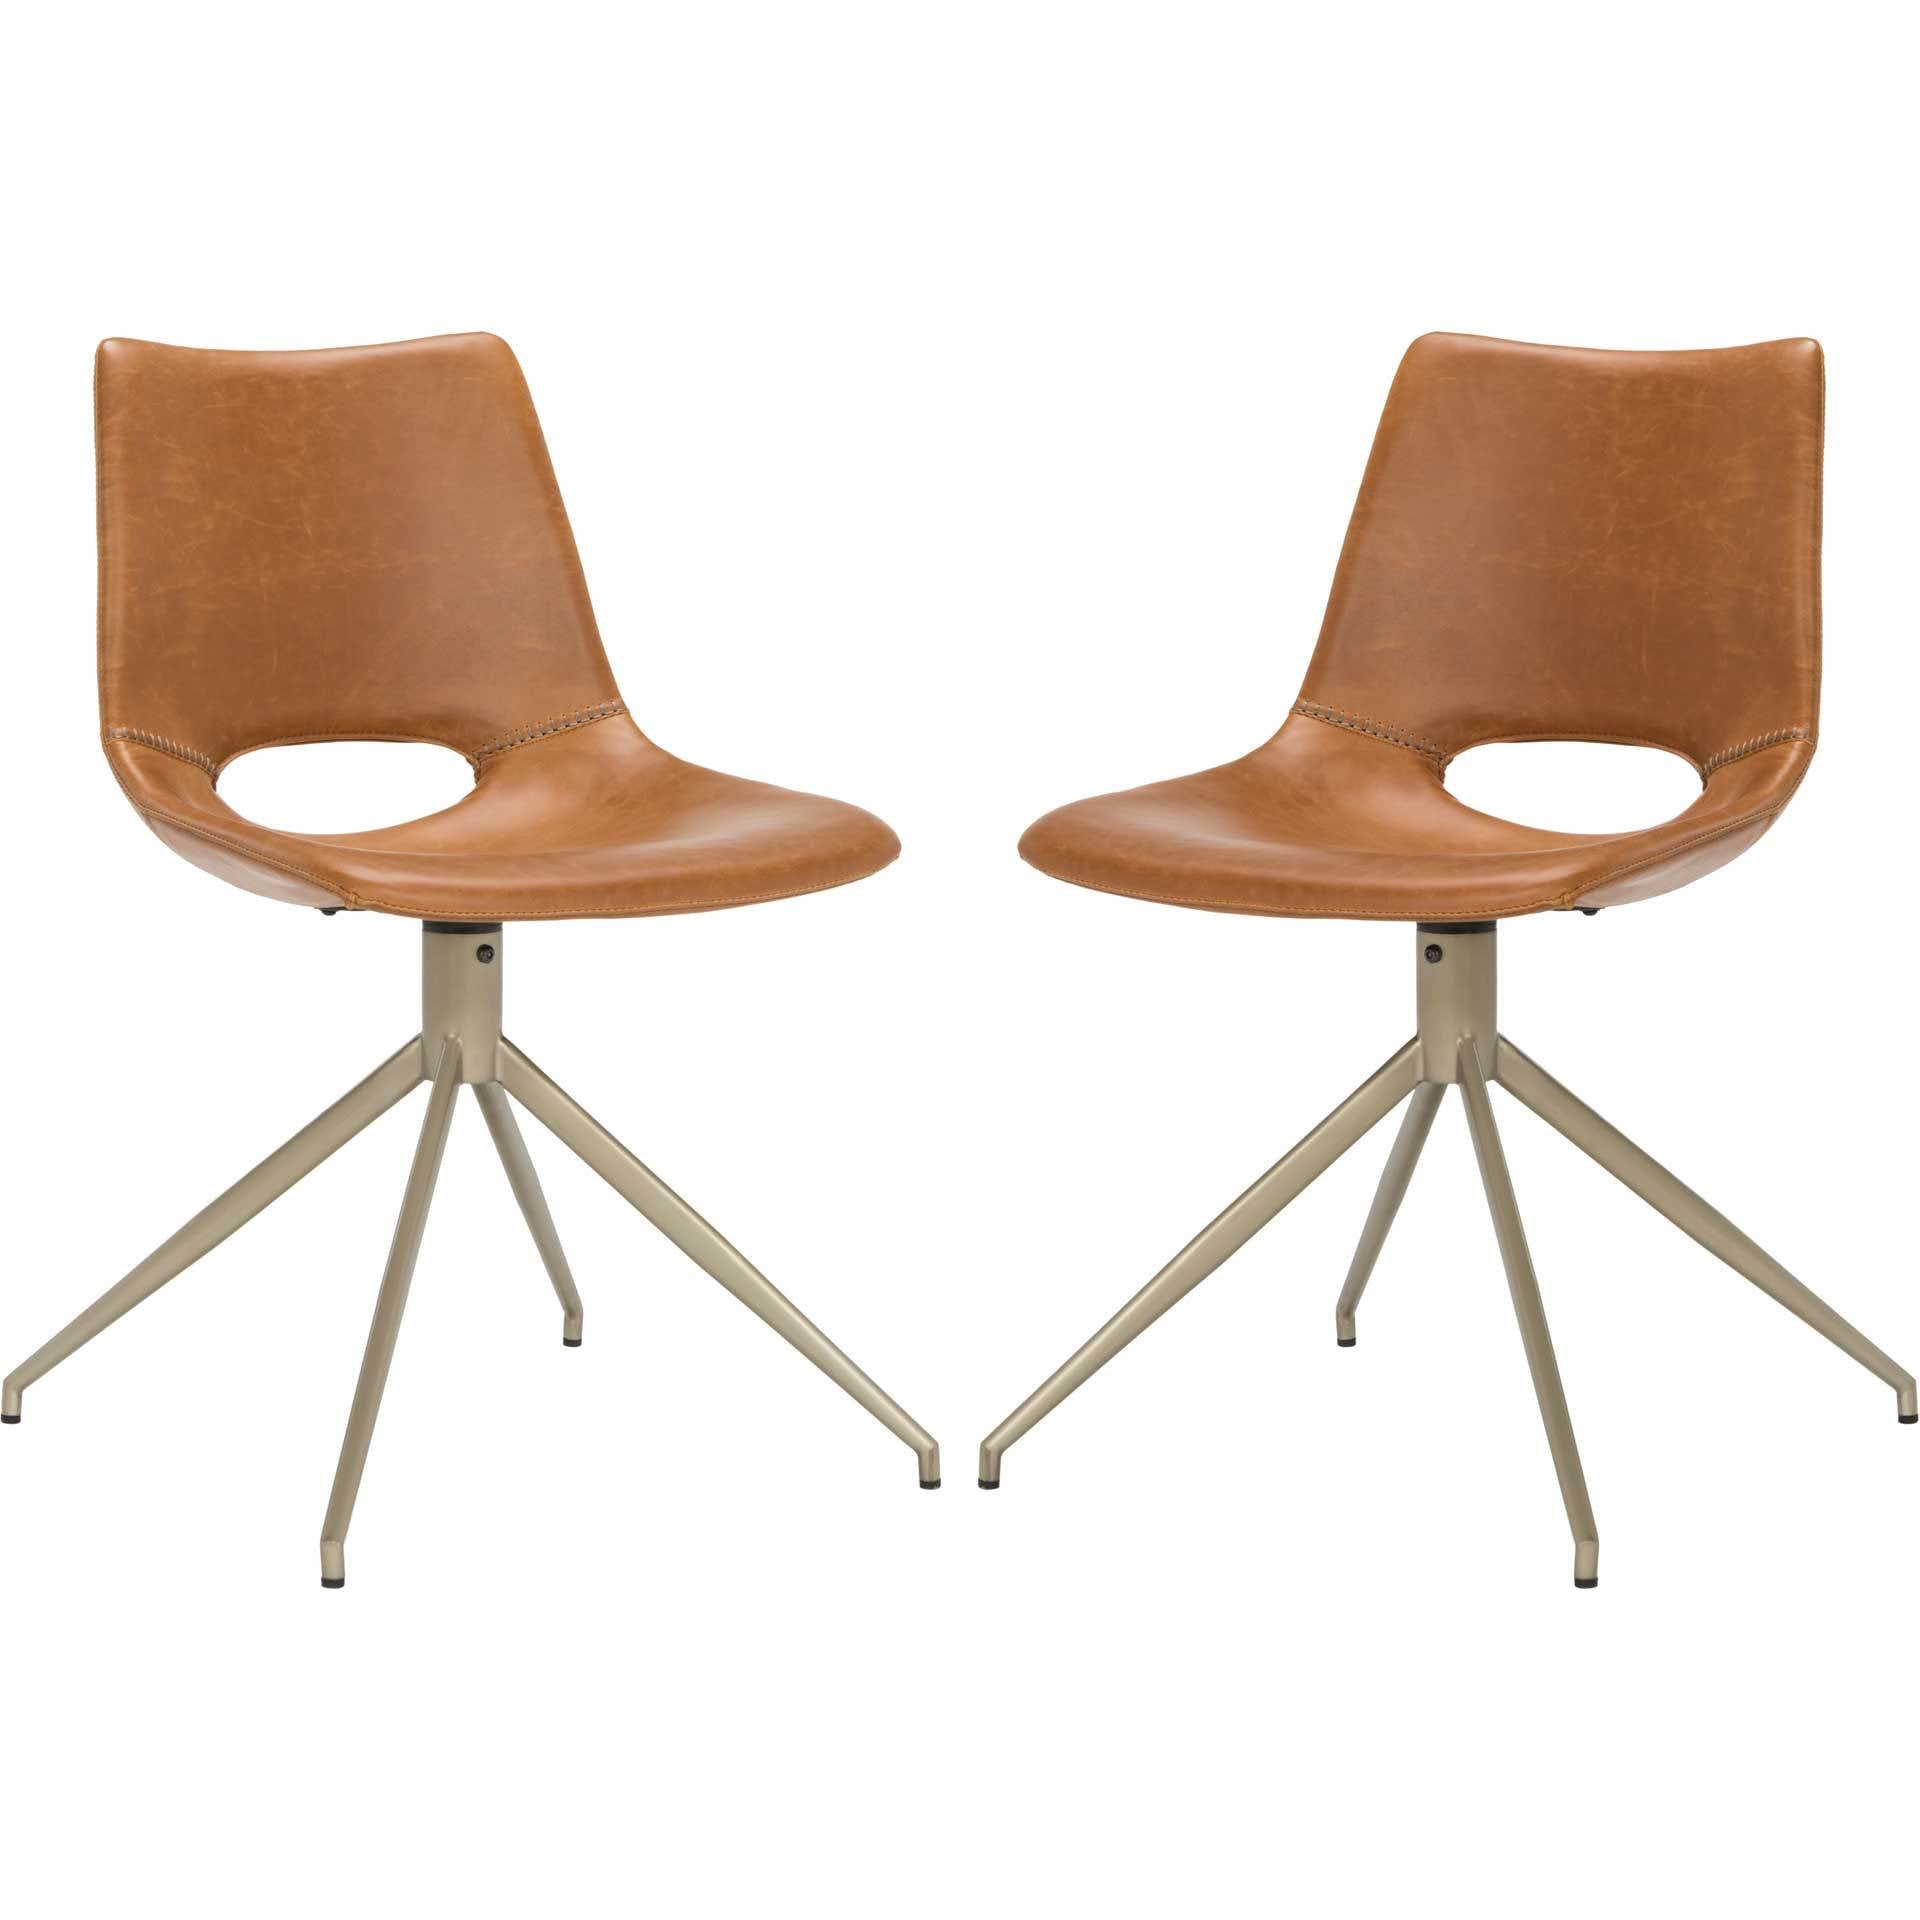 Dalary Leather Swivel Chair Light Brown (Set of 2)